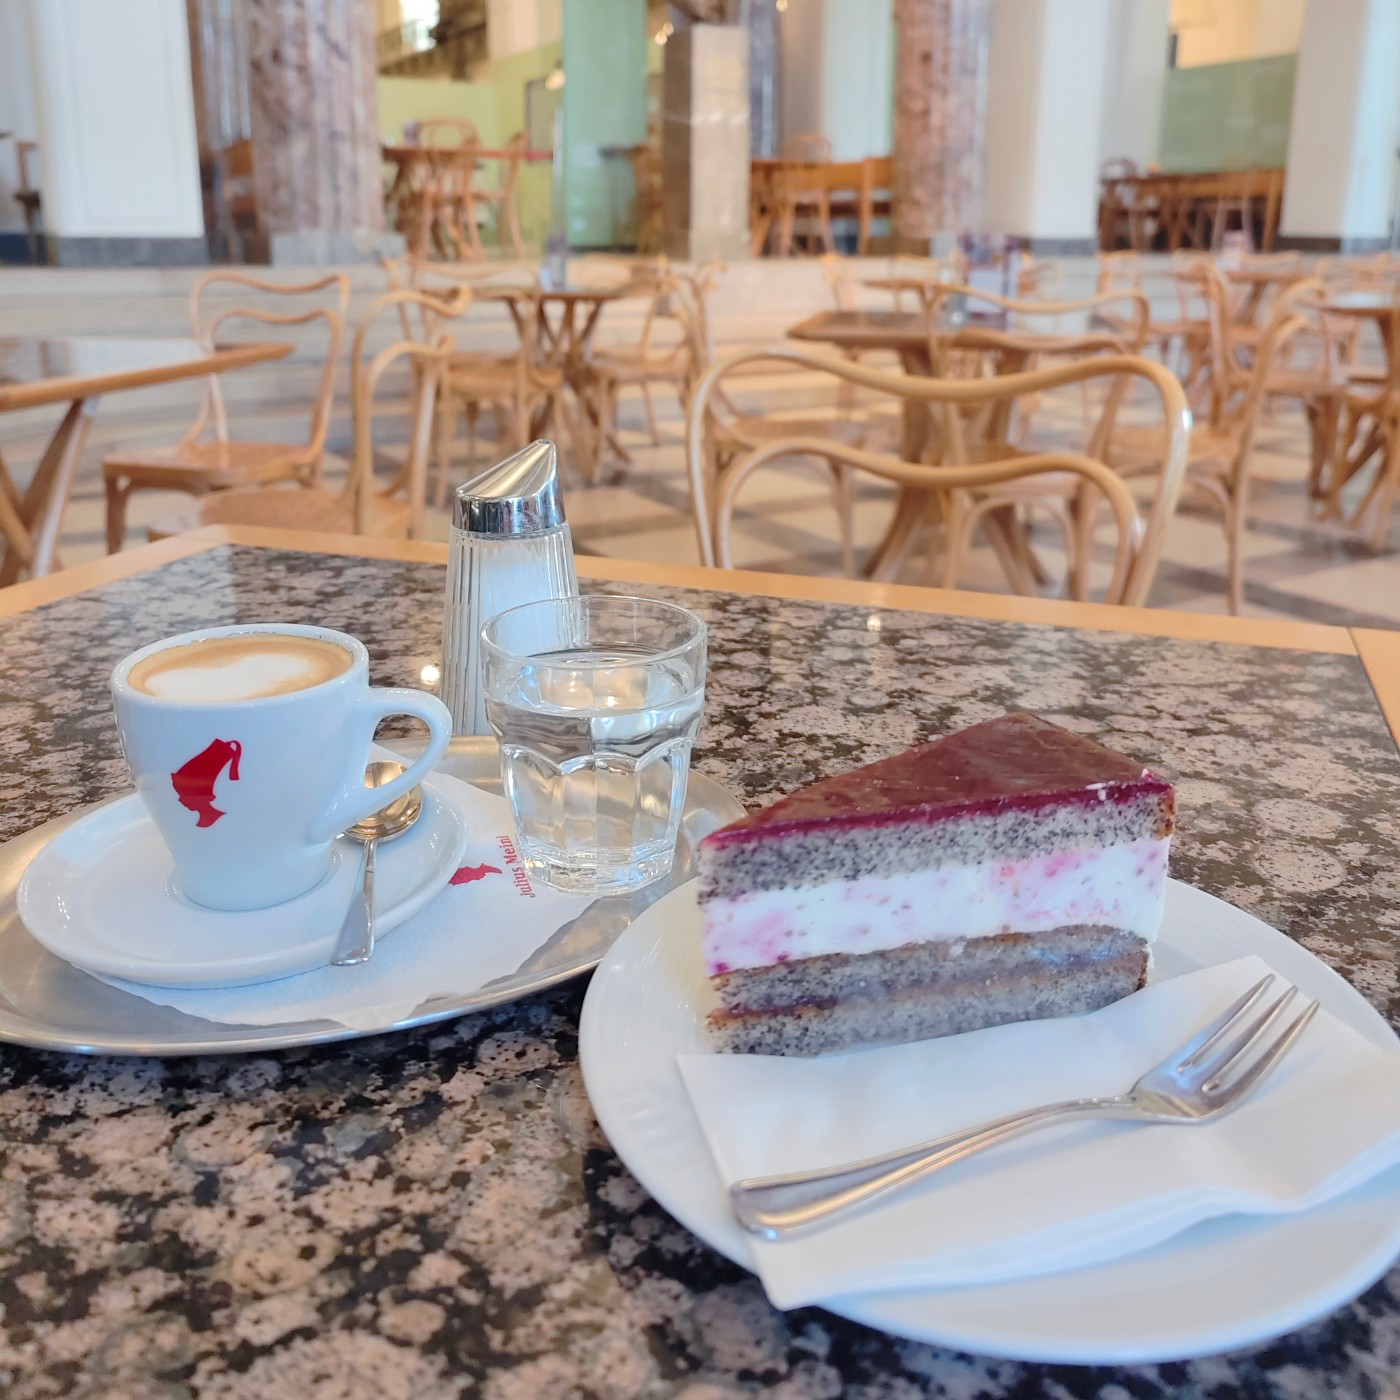 A cake and a coffee at a table in the Joules Bistro: 